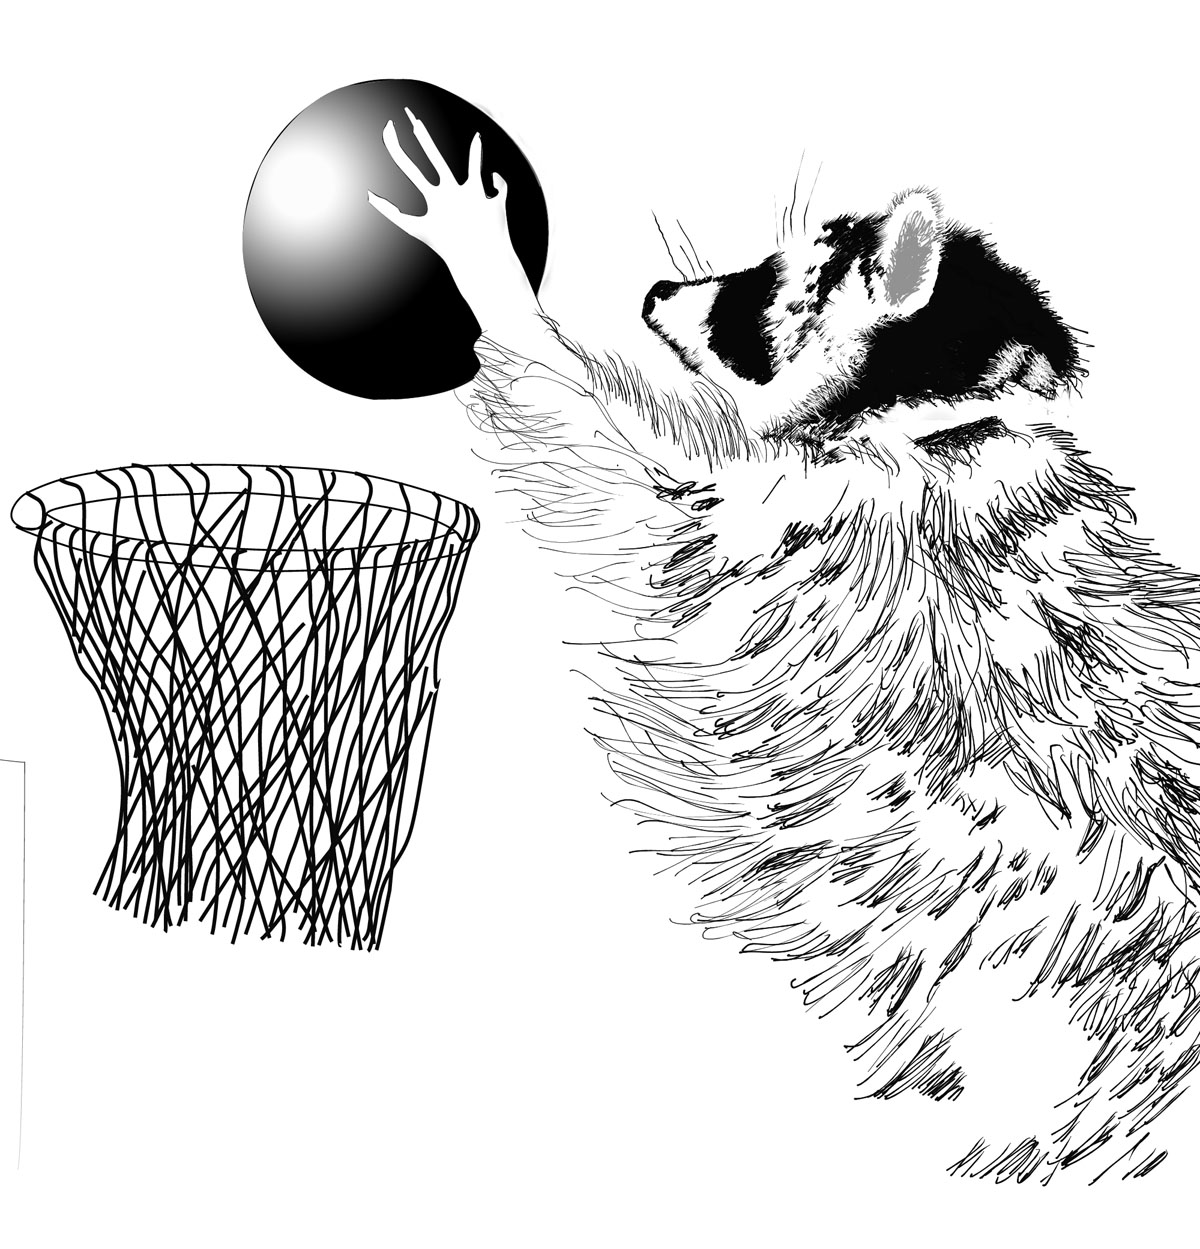 a raccoon lifts a basketball to the basket